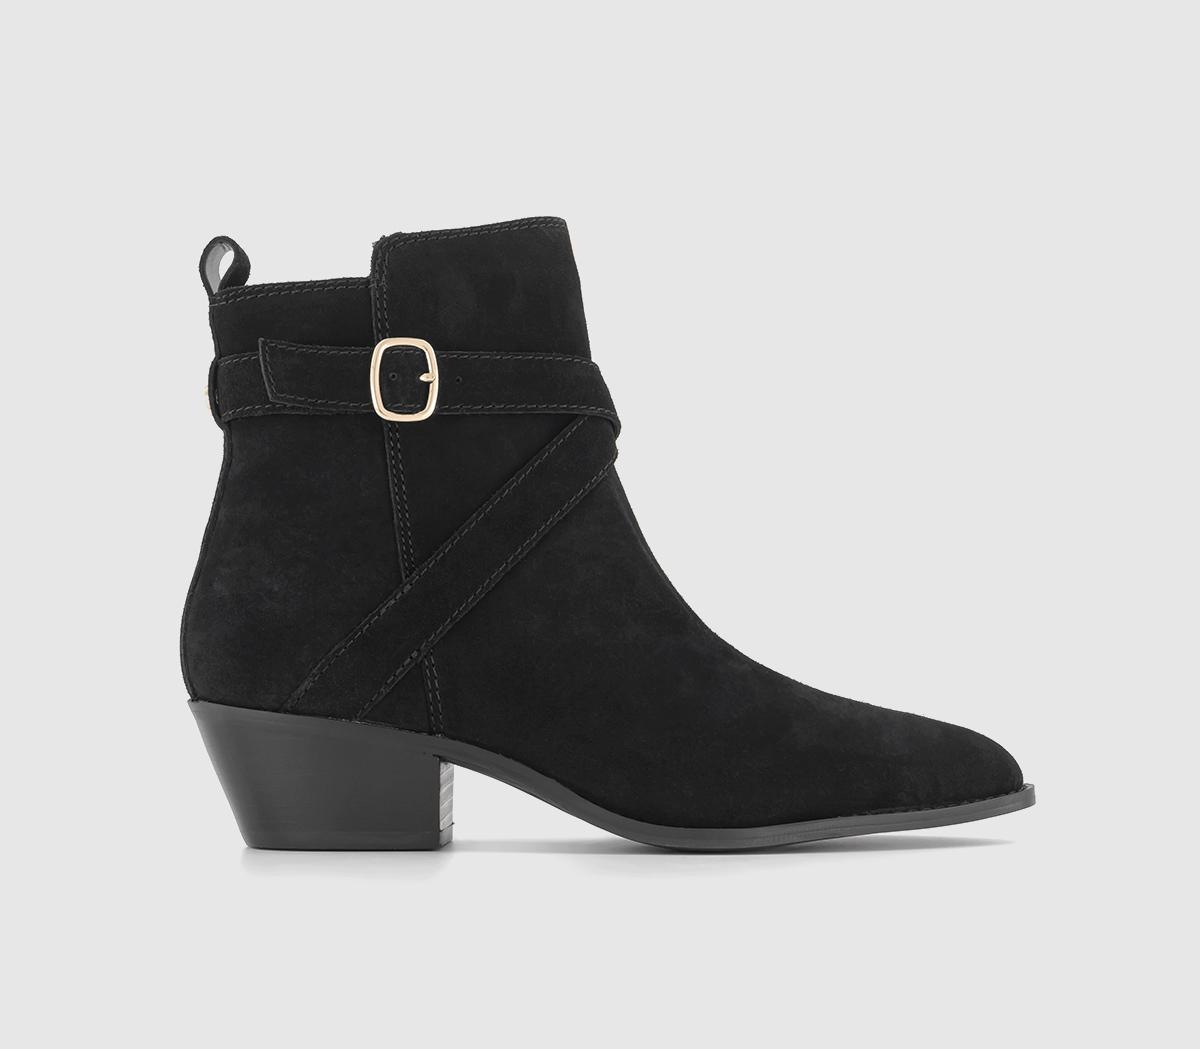 Arcade Strap Detail Pointed Toe Ankle Boots Black Suede